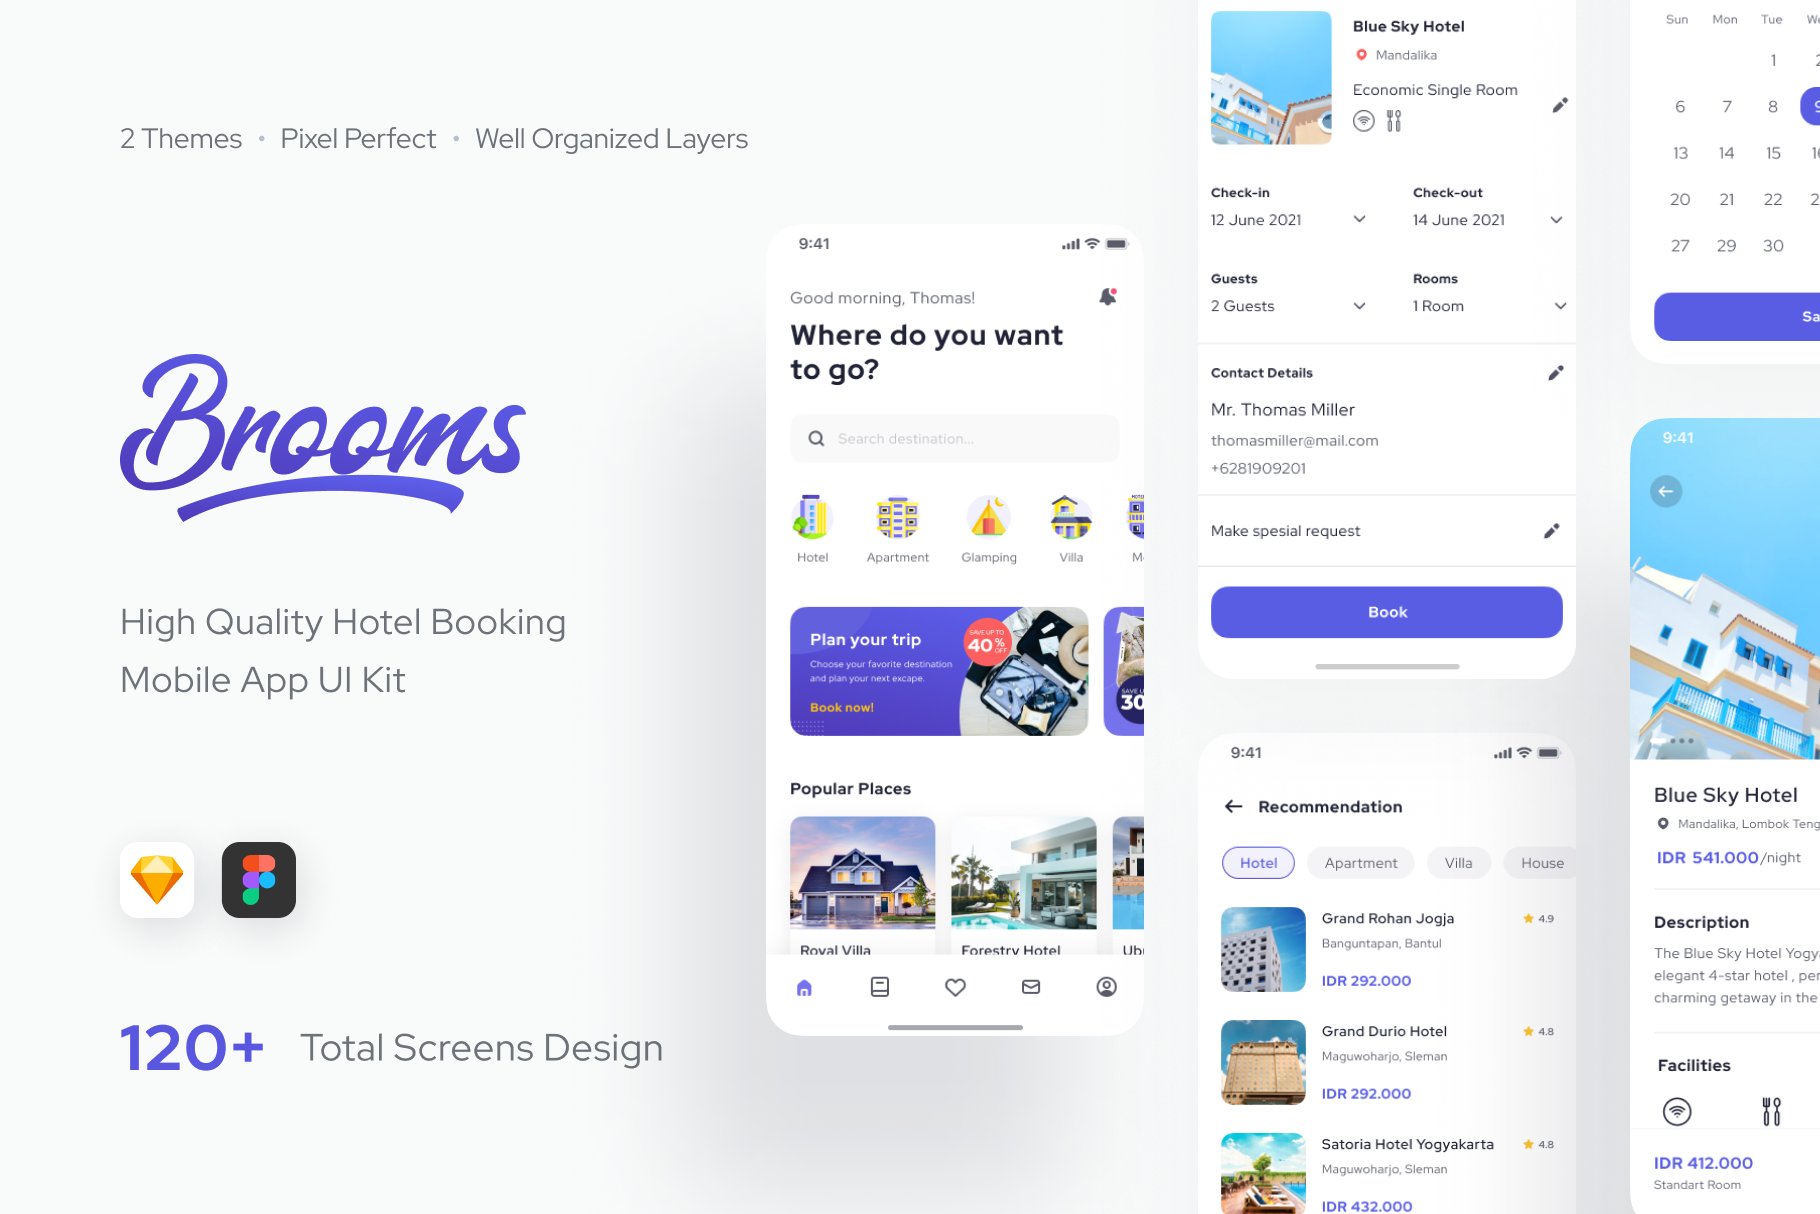 Broom - Hotel Airbnb Booking UI Kit cover image.